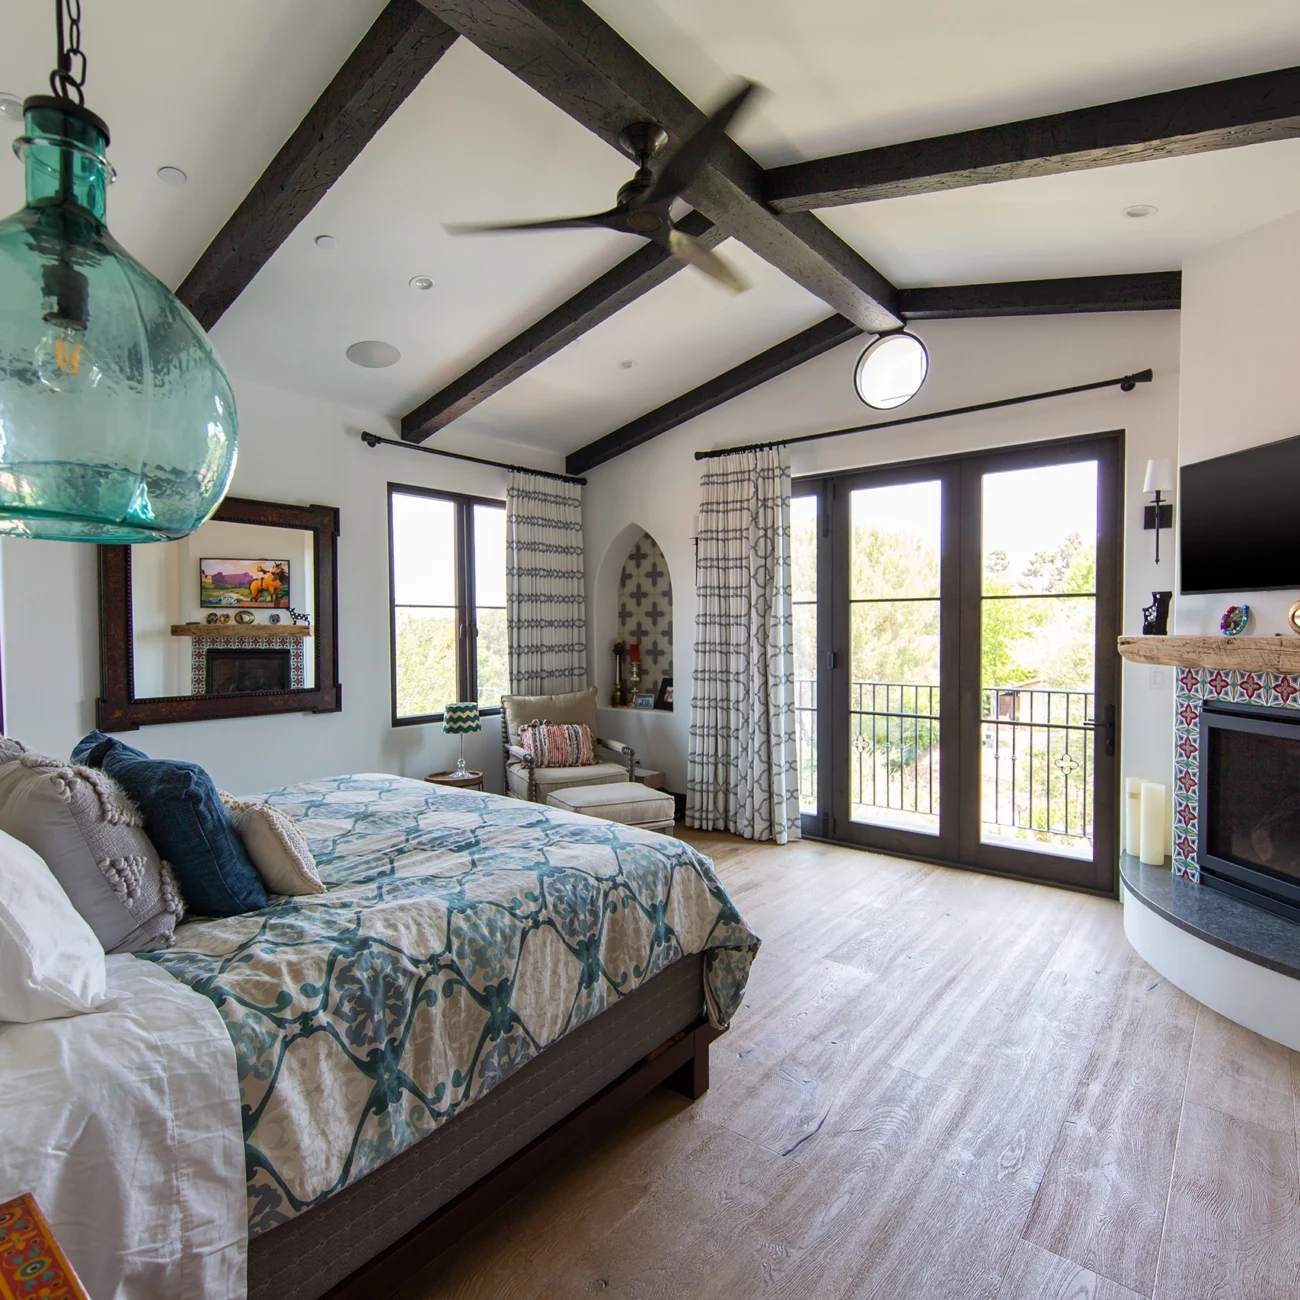 Christine Vroom Interiors | Via Arriba | Master Bedroom with exposed beams, fireplace and french doors